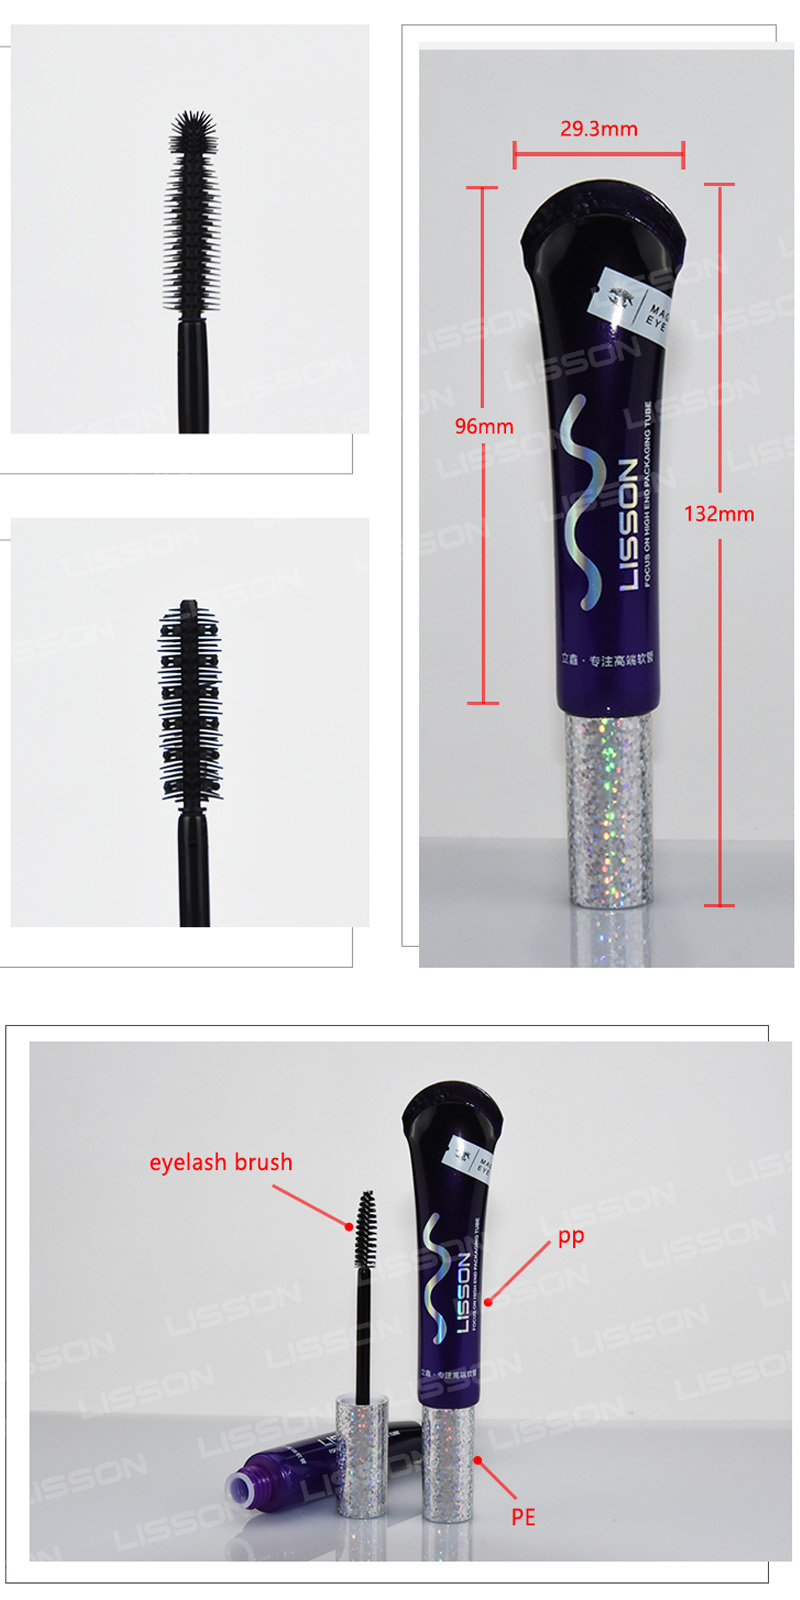 Lisson logo printed cosmetic tube packaging oval